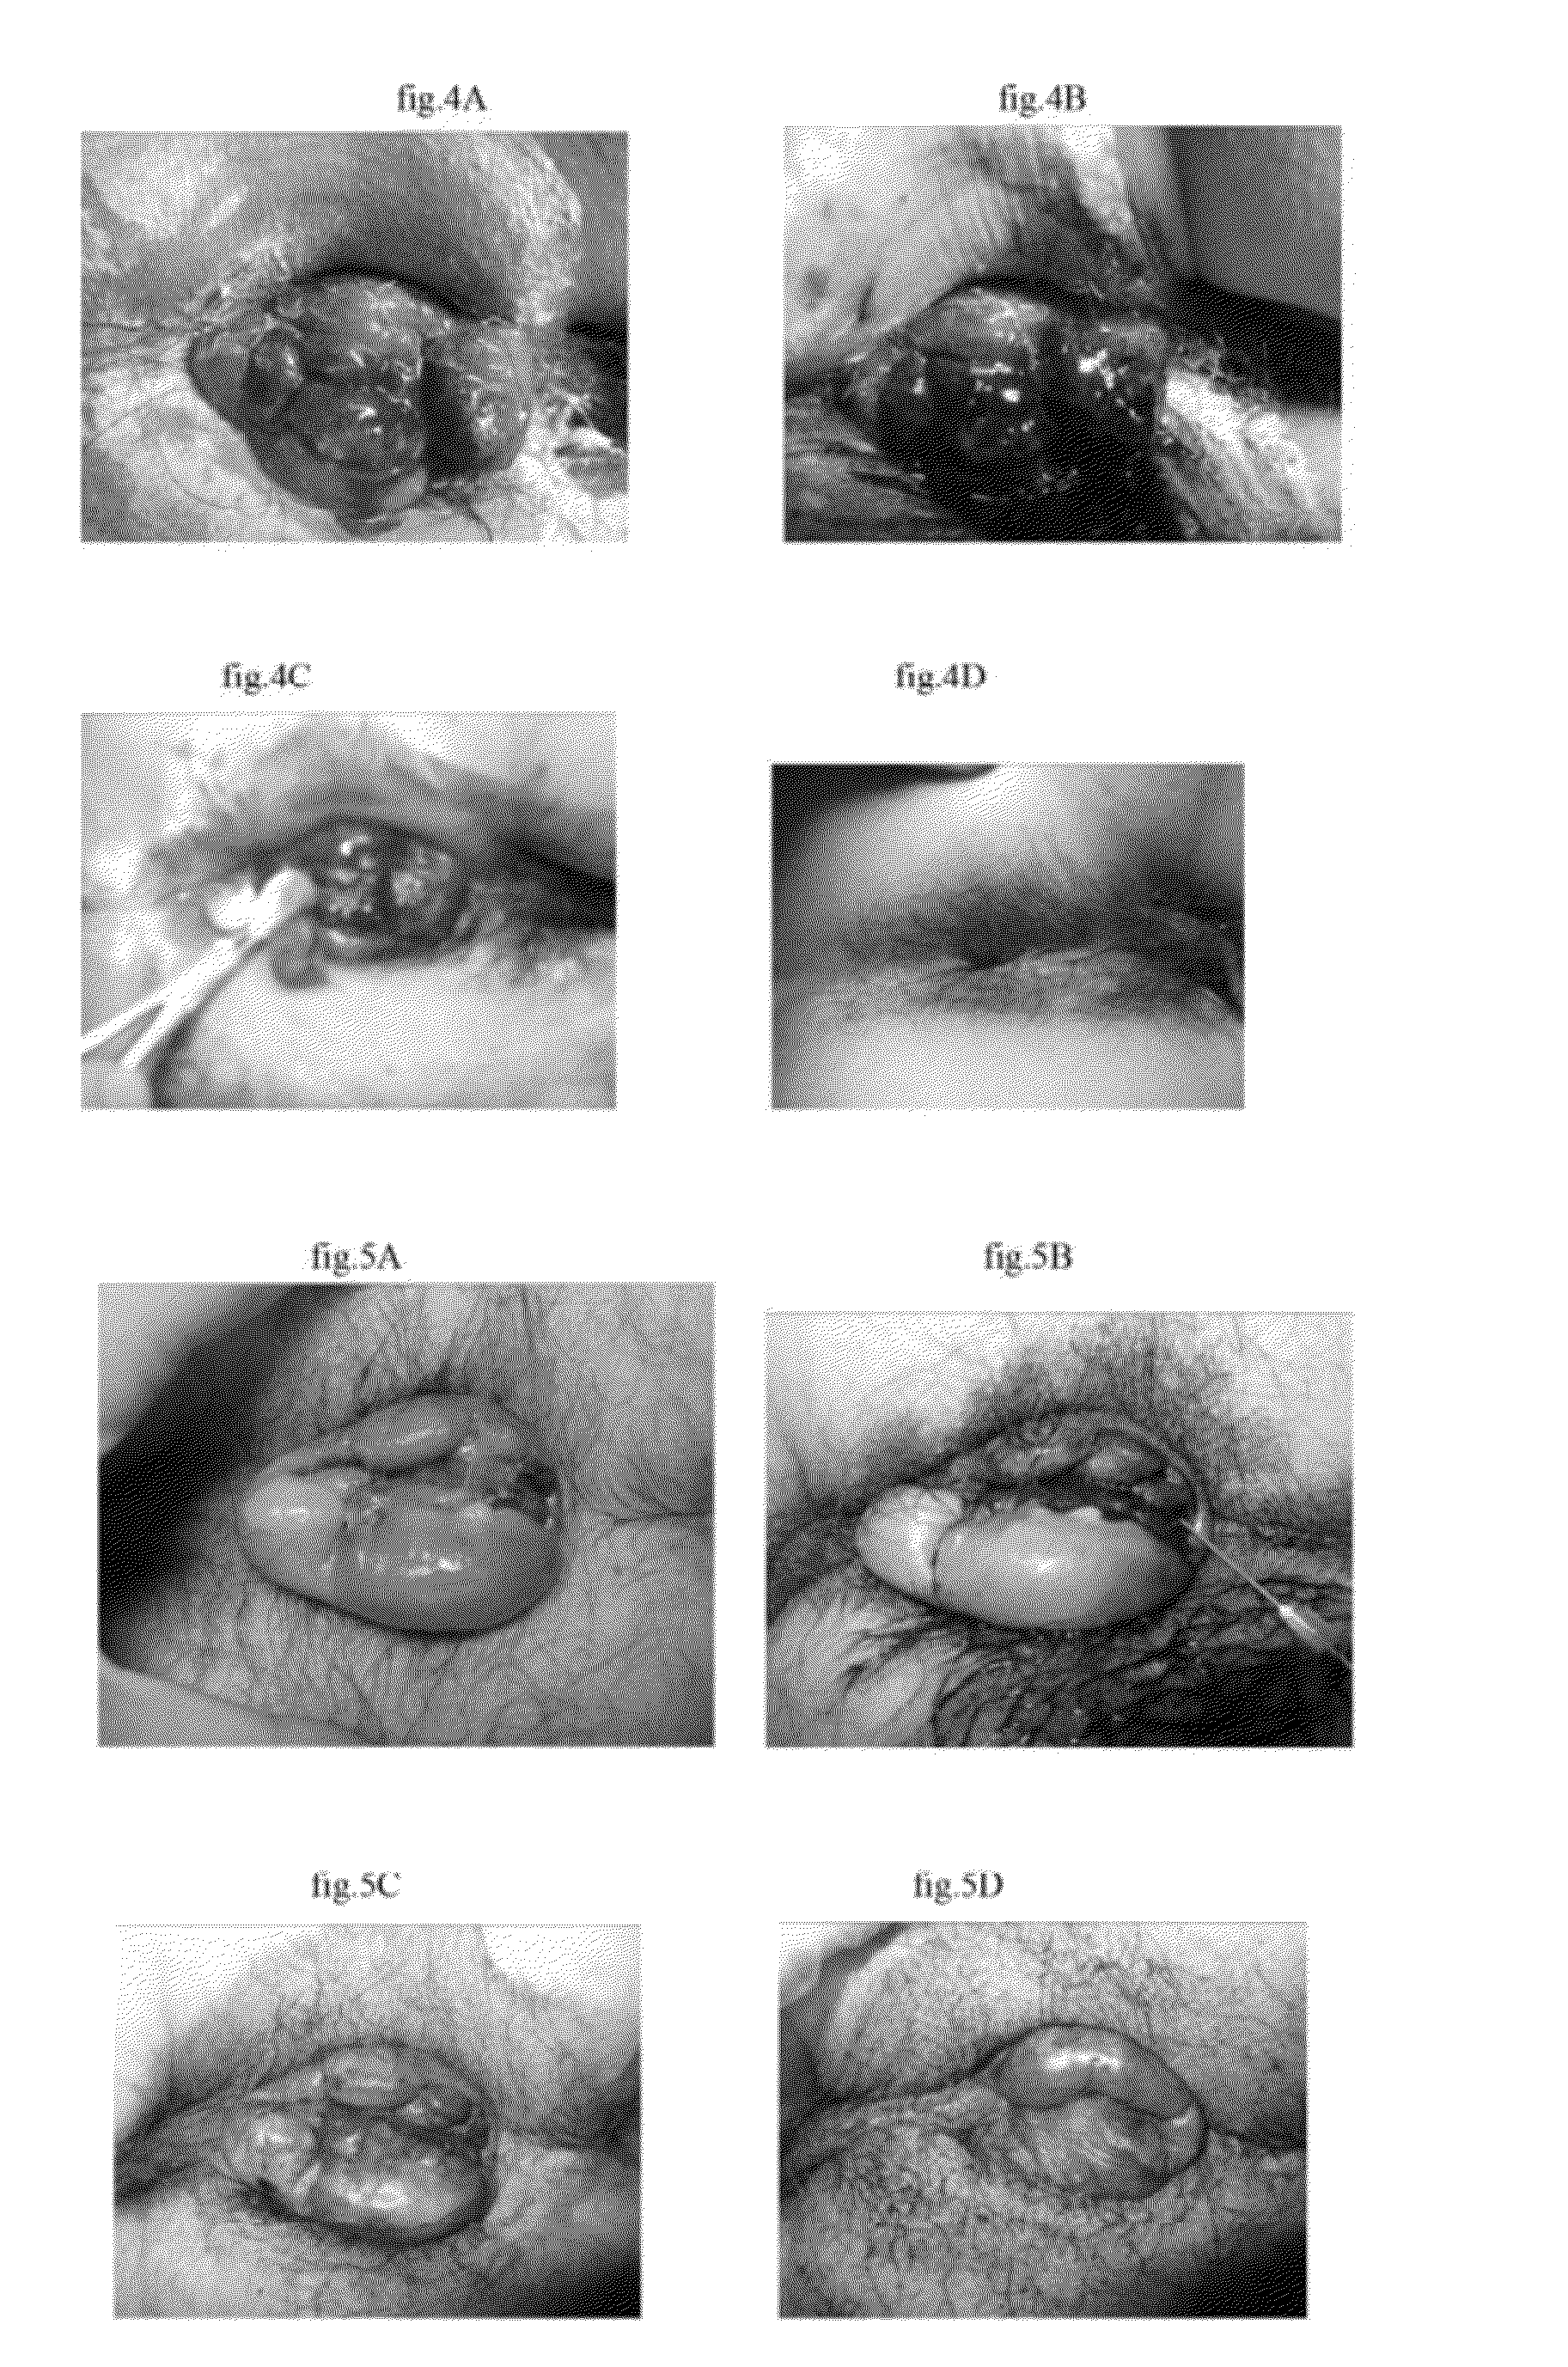 Pharmaceutical compositions for dehydrating, atrophying and eliminating pathological tissues